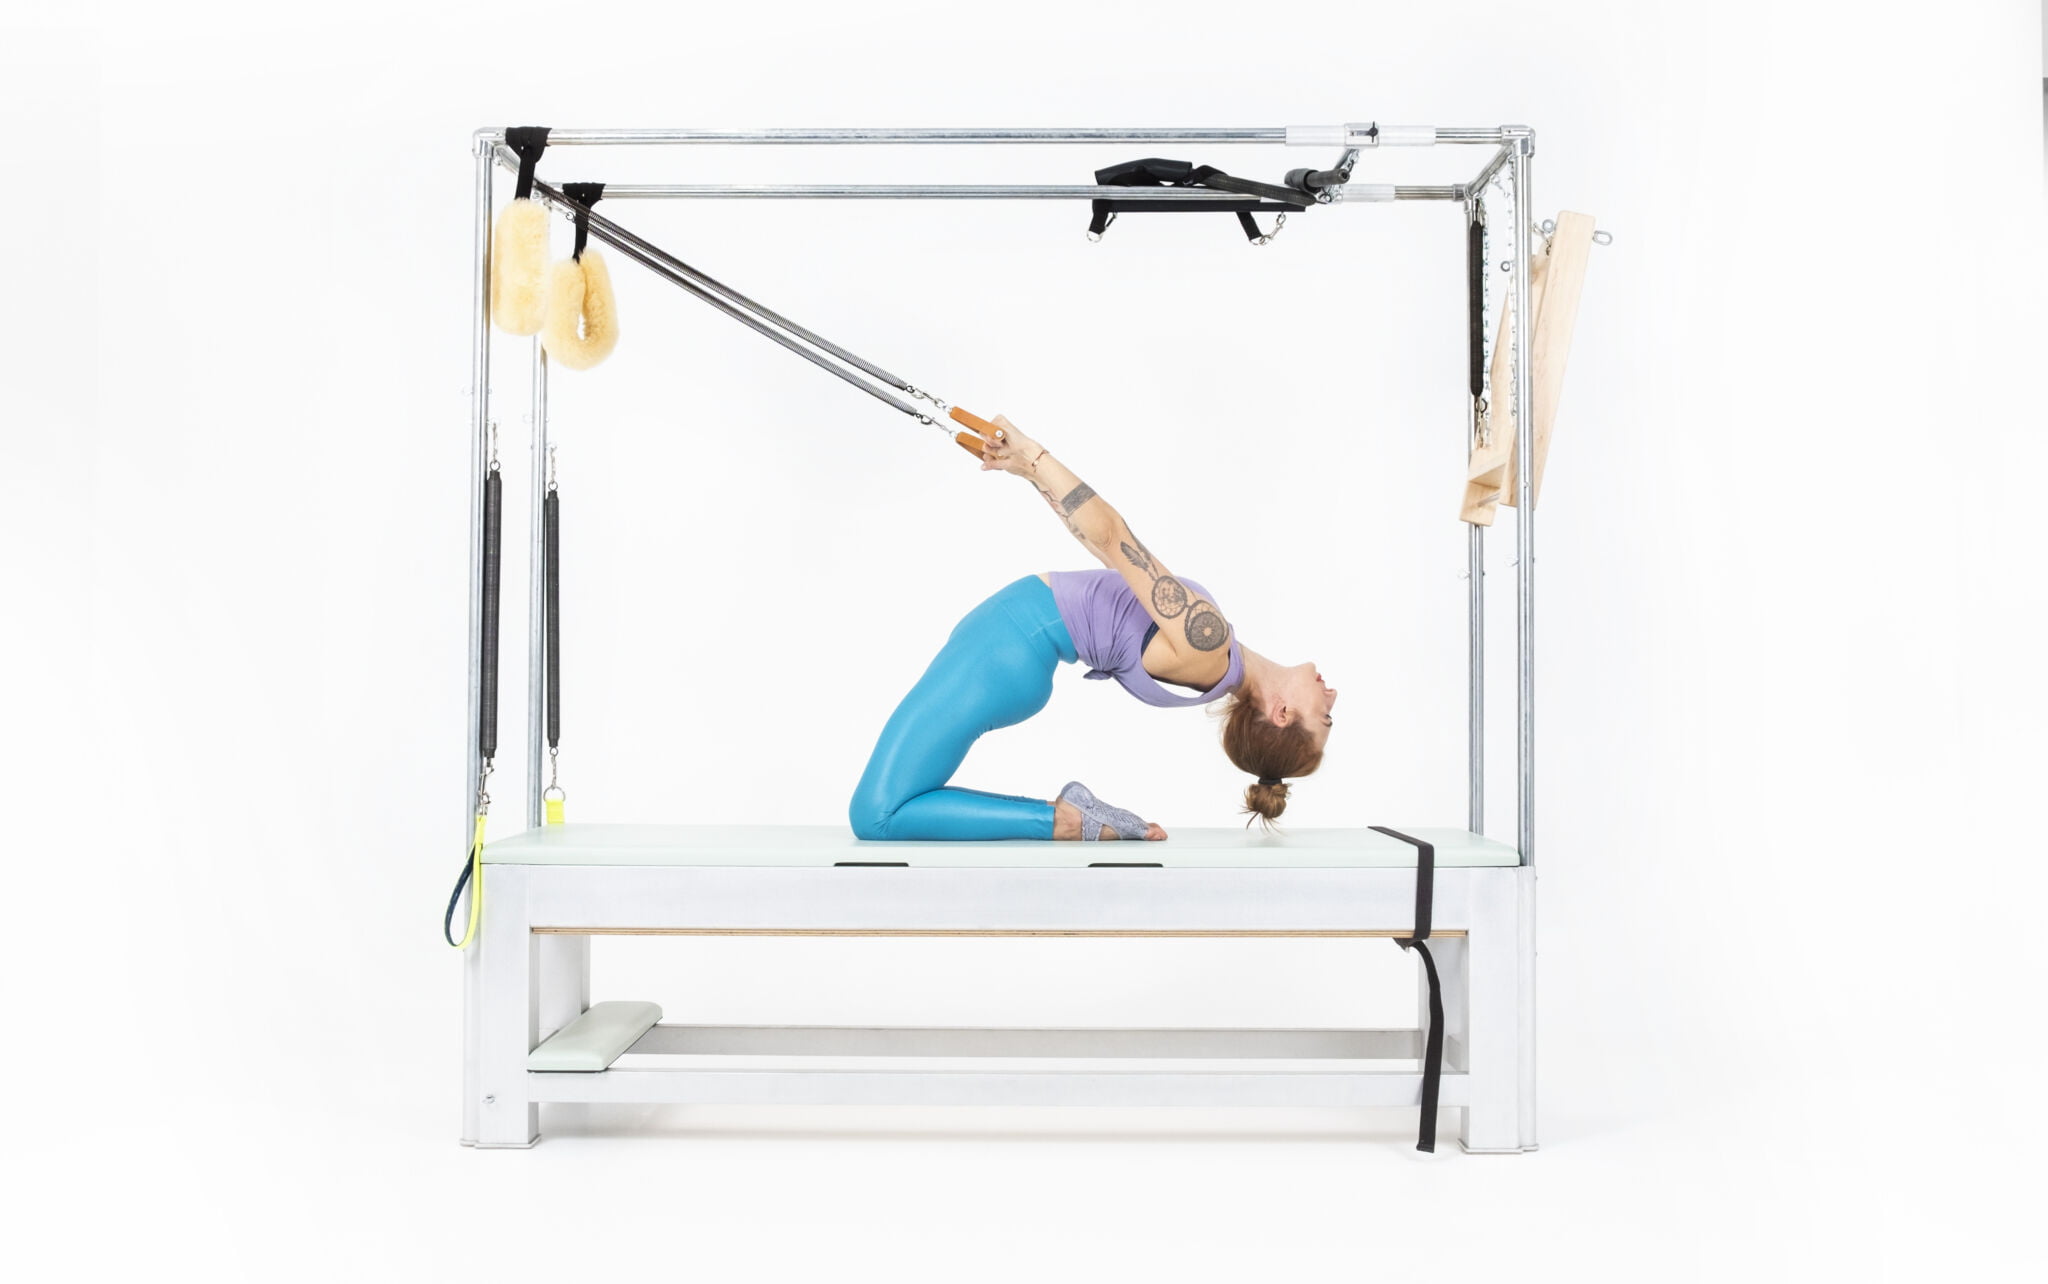 Thigh Stretch with Arm Springs on the Cadillac or Tower Online Pilates Classes